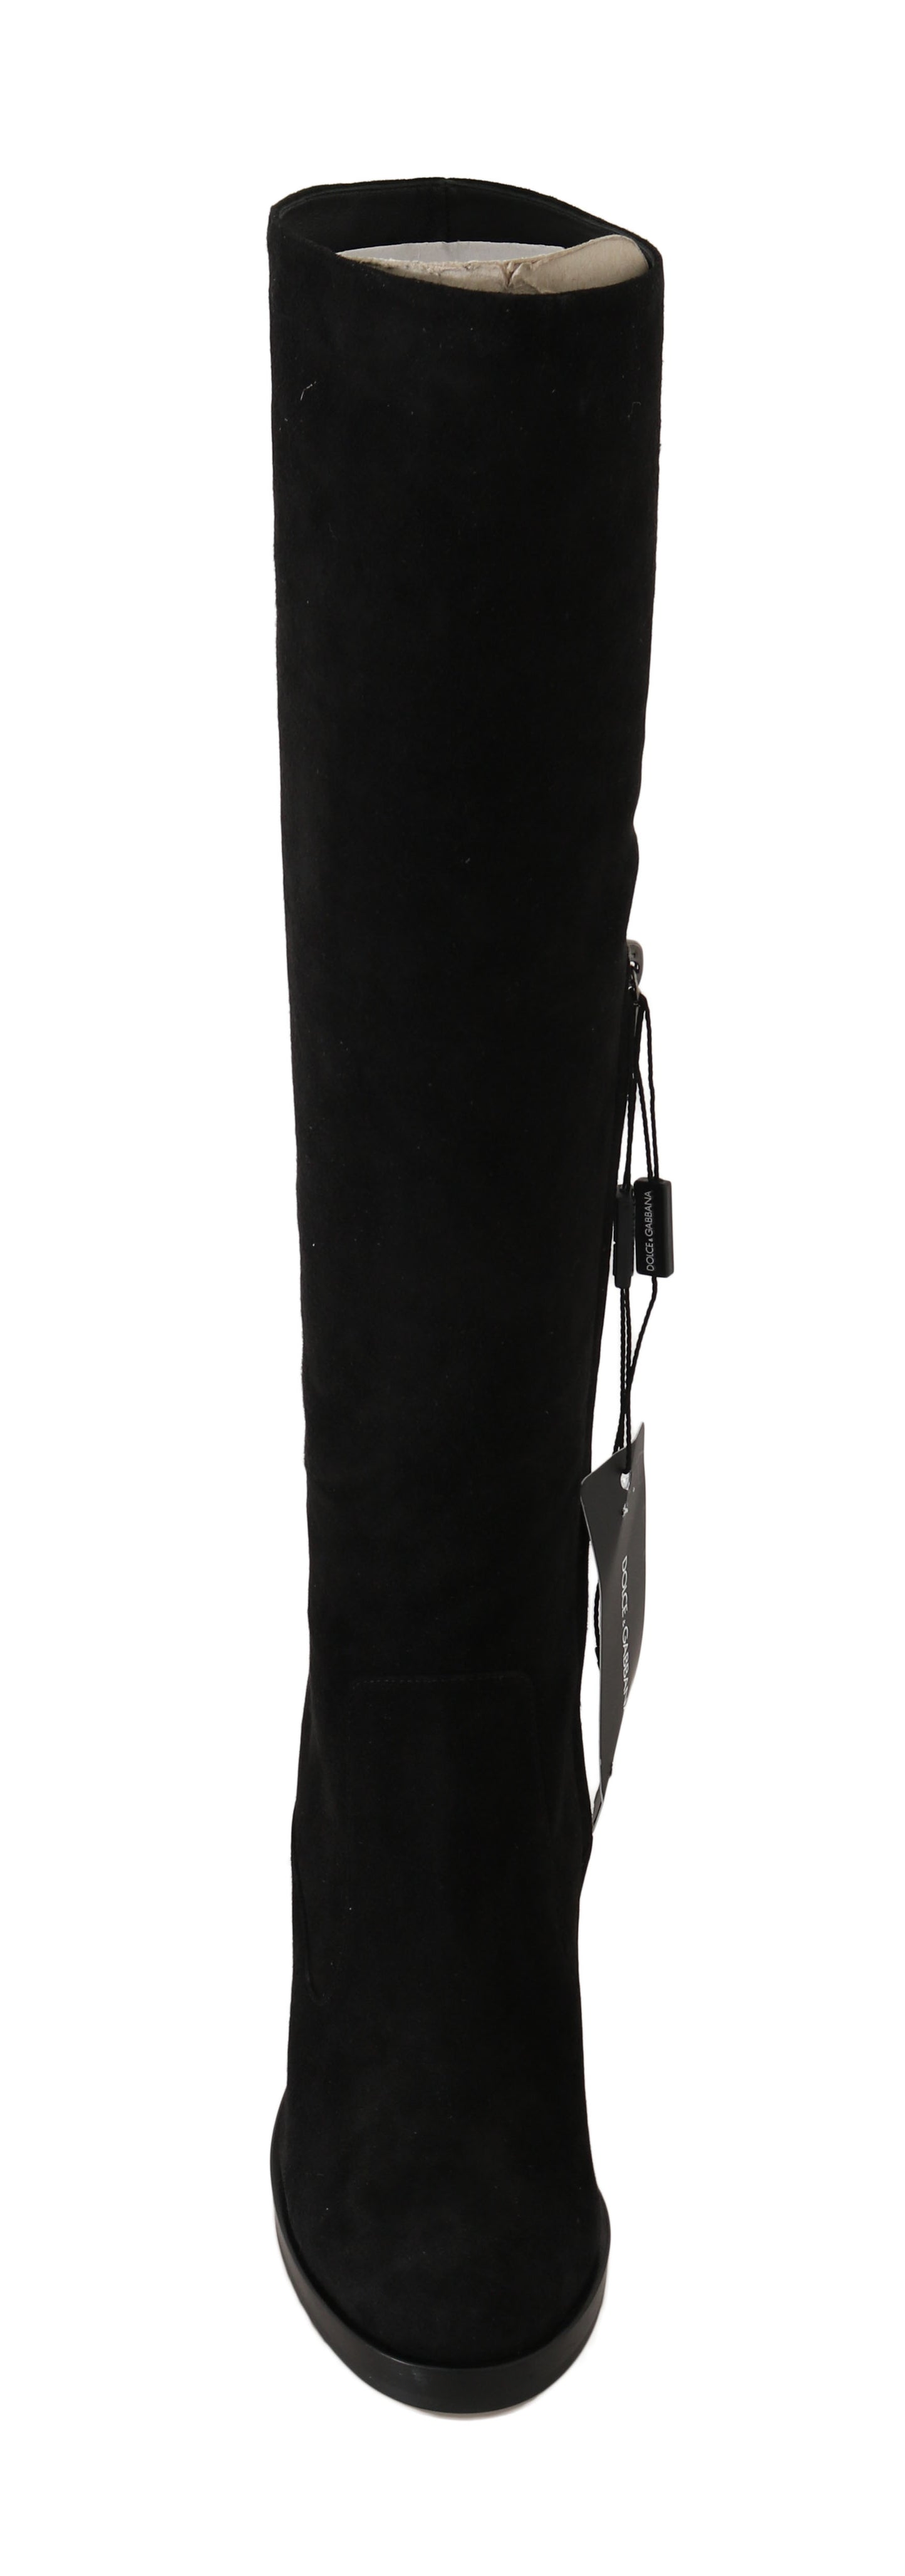 Black Suede Leather Knee High Boots